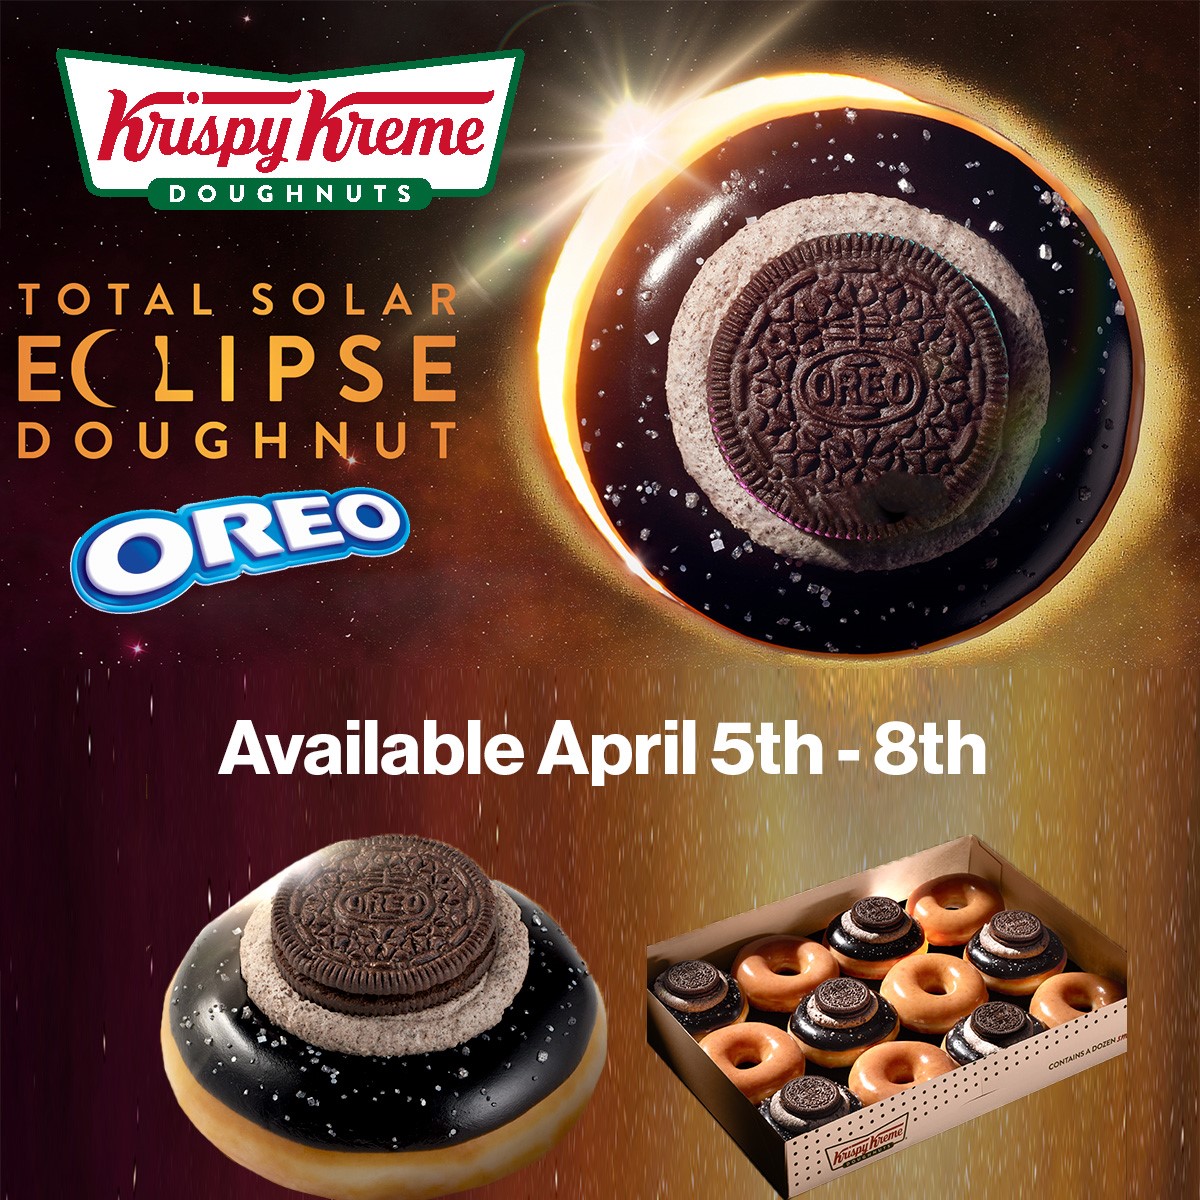 Krispy Kreme will have a Total Solar Eclipse Doughnut with OREO cookies April 5th-8th in honor of the solar eclipse. The doughnut is glazed, dipped in black chocolate icing, topped with silver sprinkles, OREO buttercream, and topped with an OREO cookie to look like the eclipse.